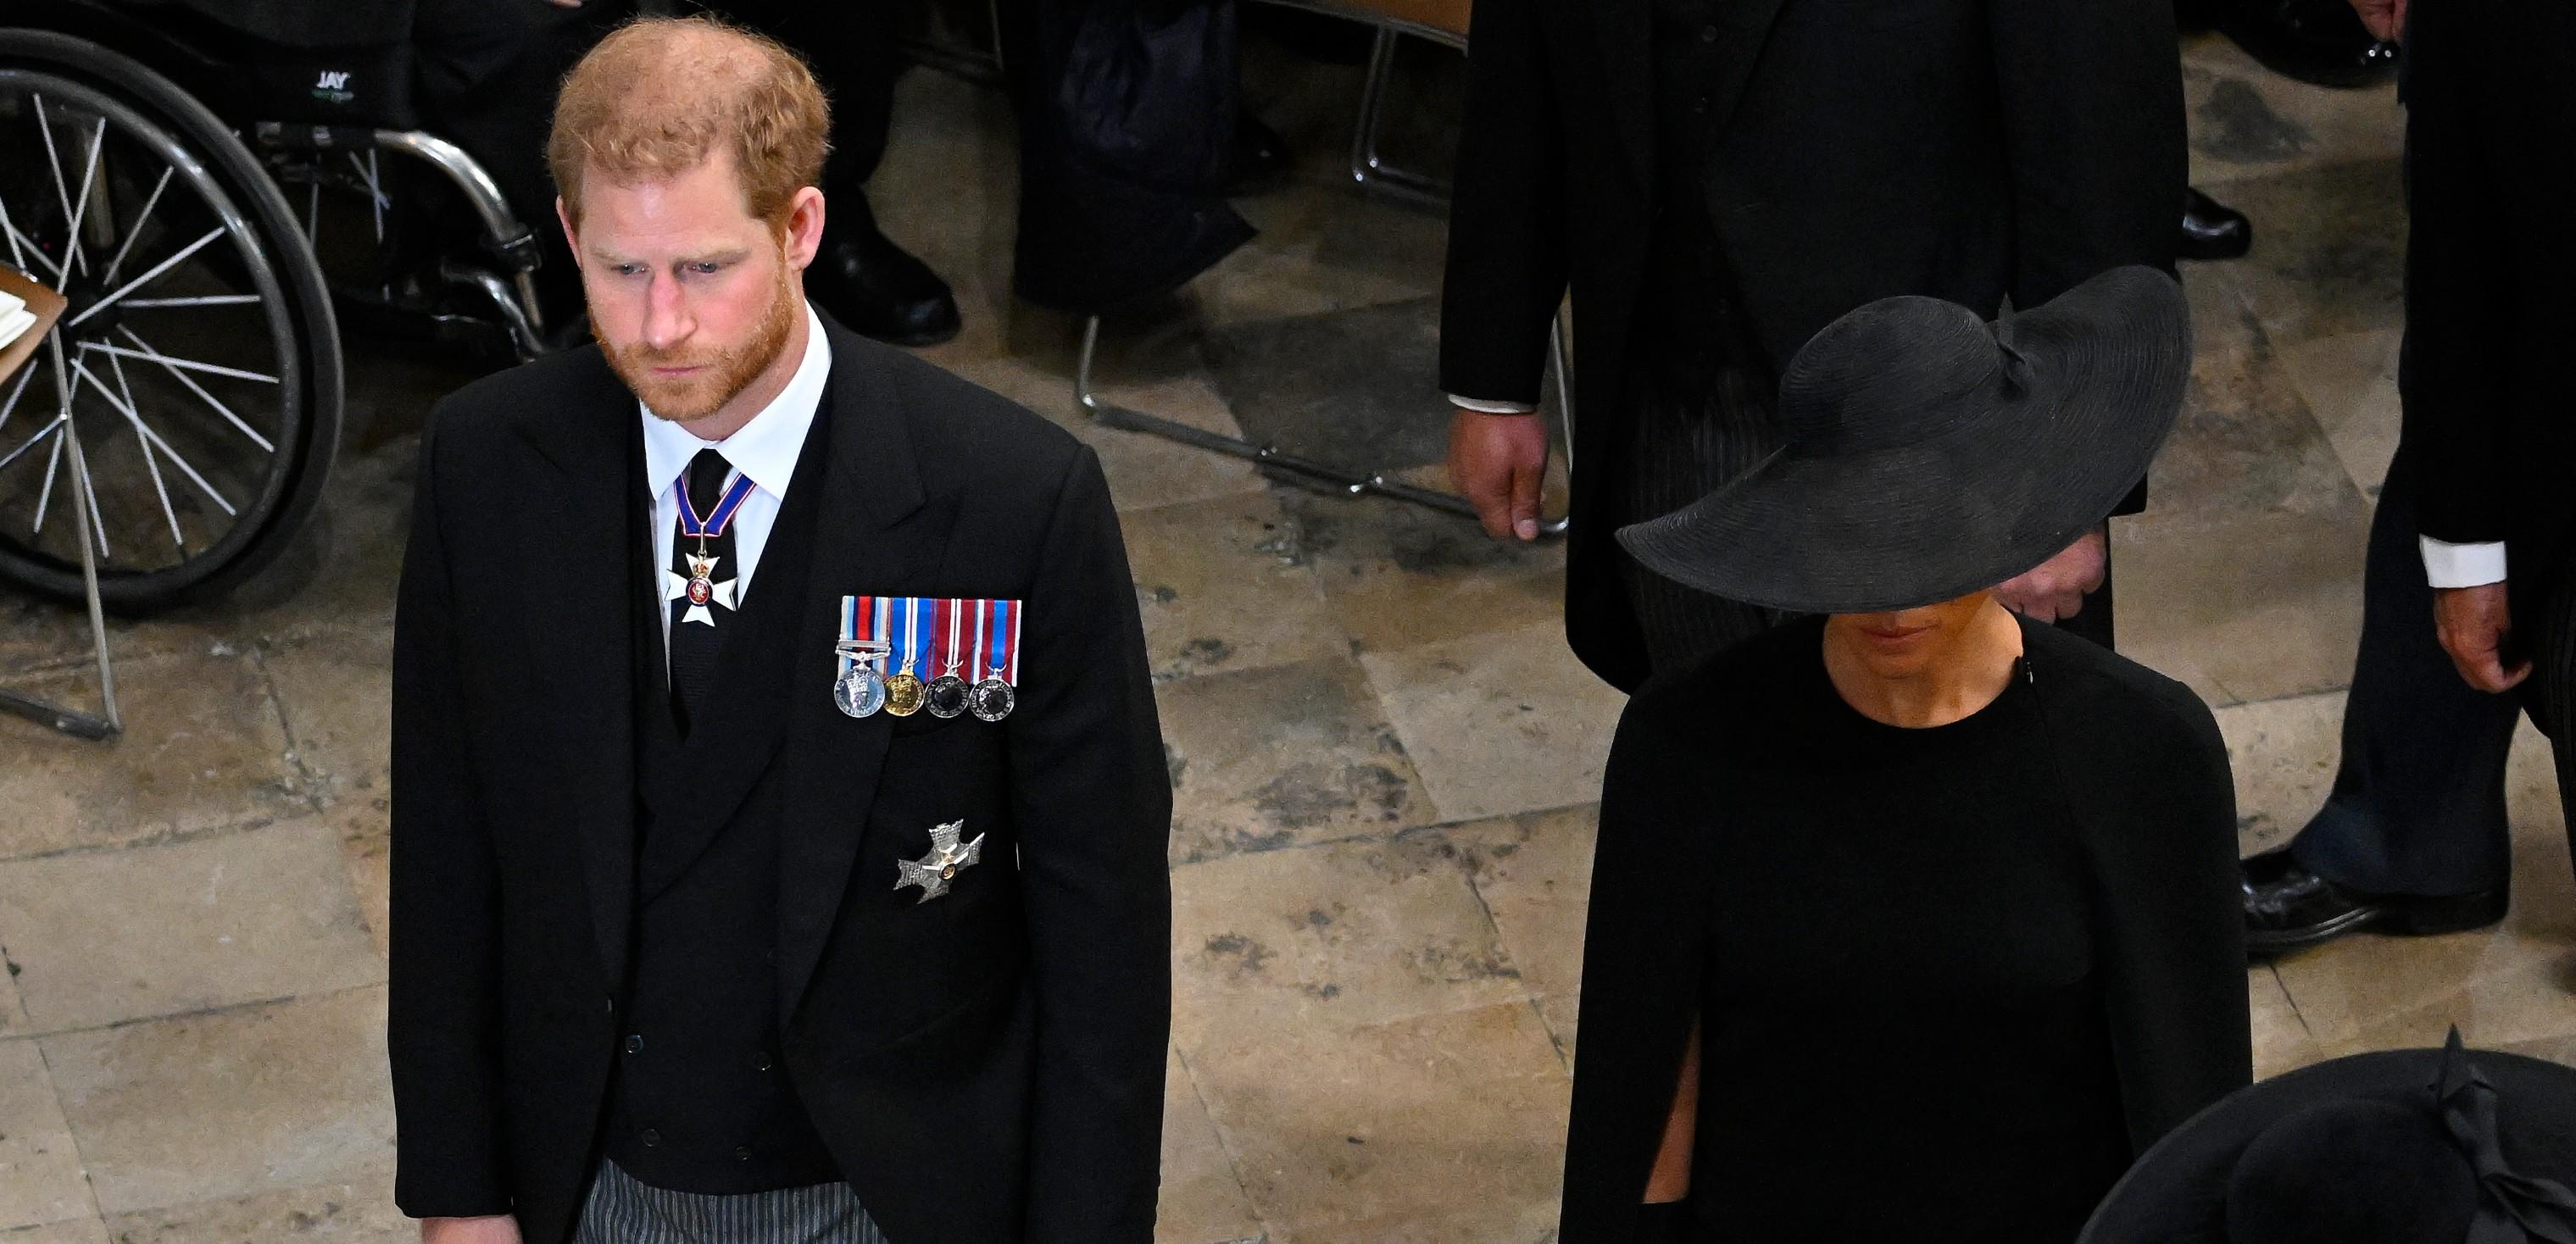 : Prince Harry, Duke of Sussex and Meghan, Duchess of Sussex departing Westminster Abbey during the State Funeral of Queen Elizabeth II